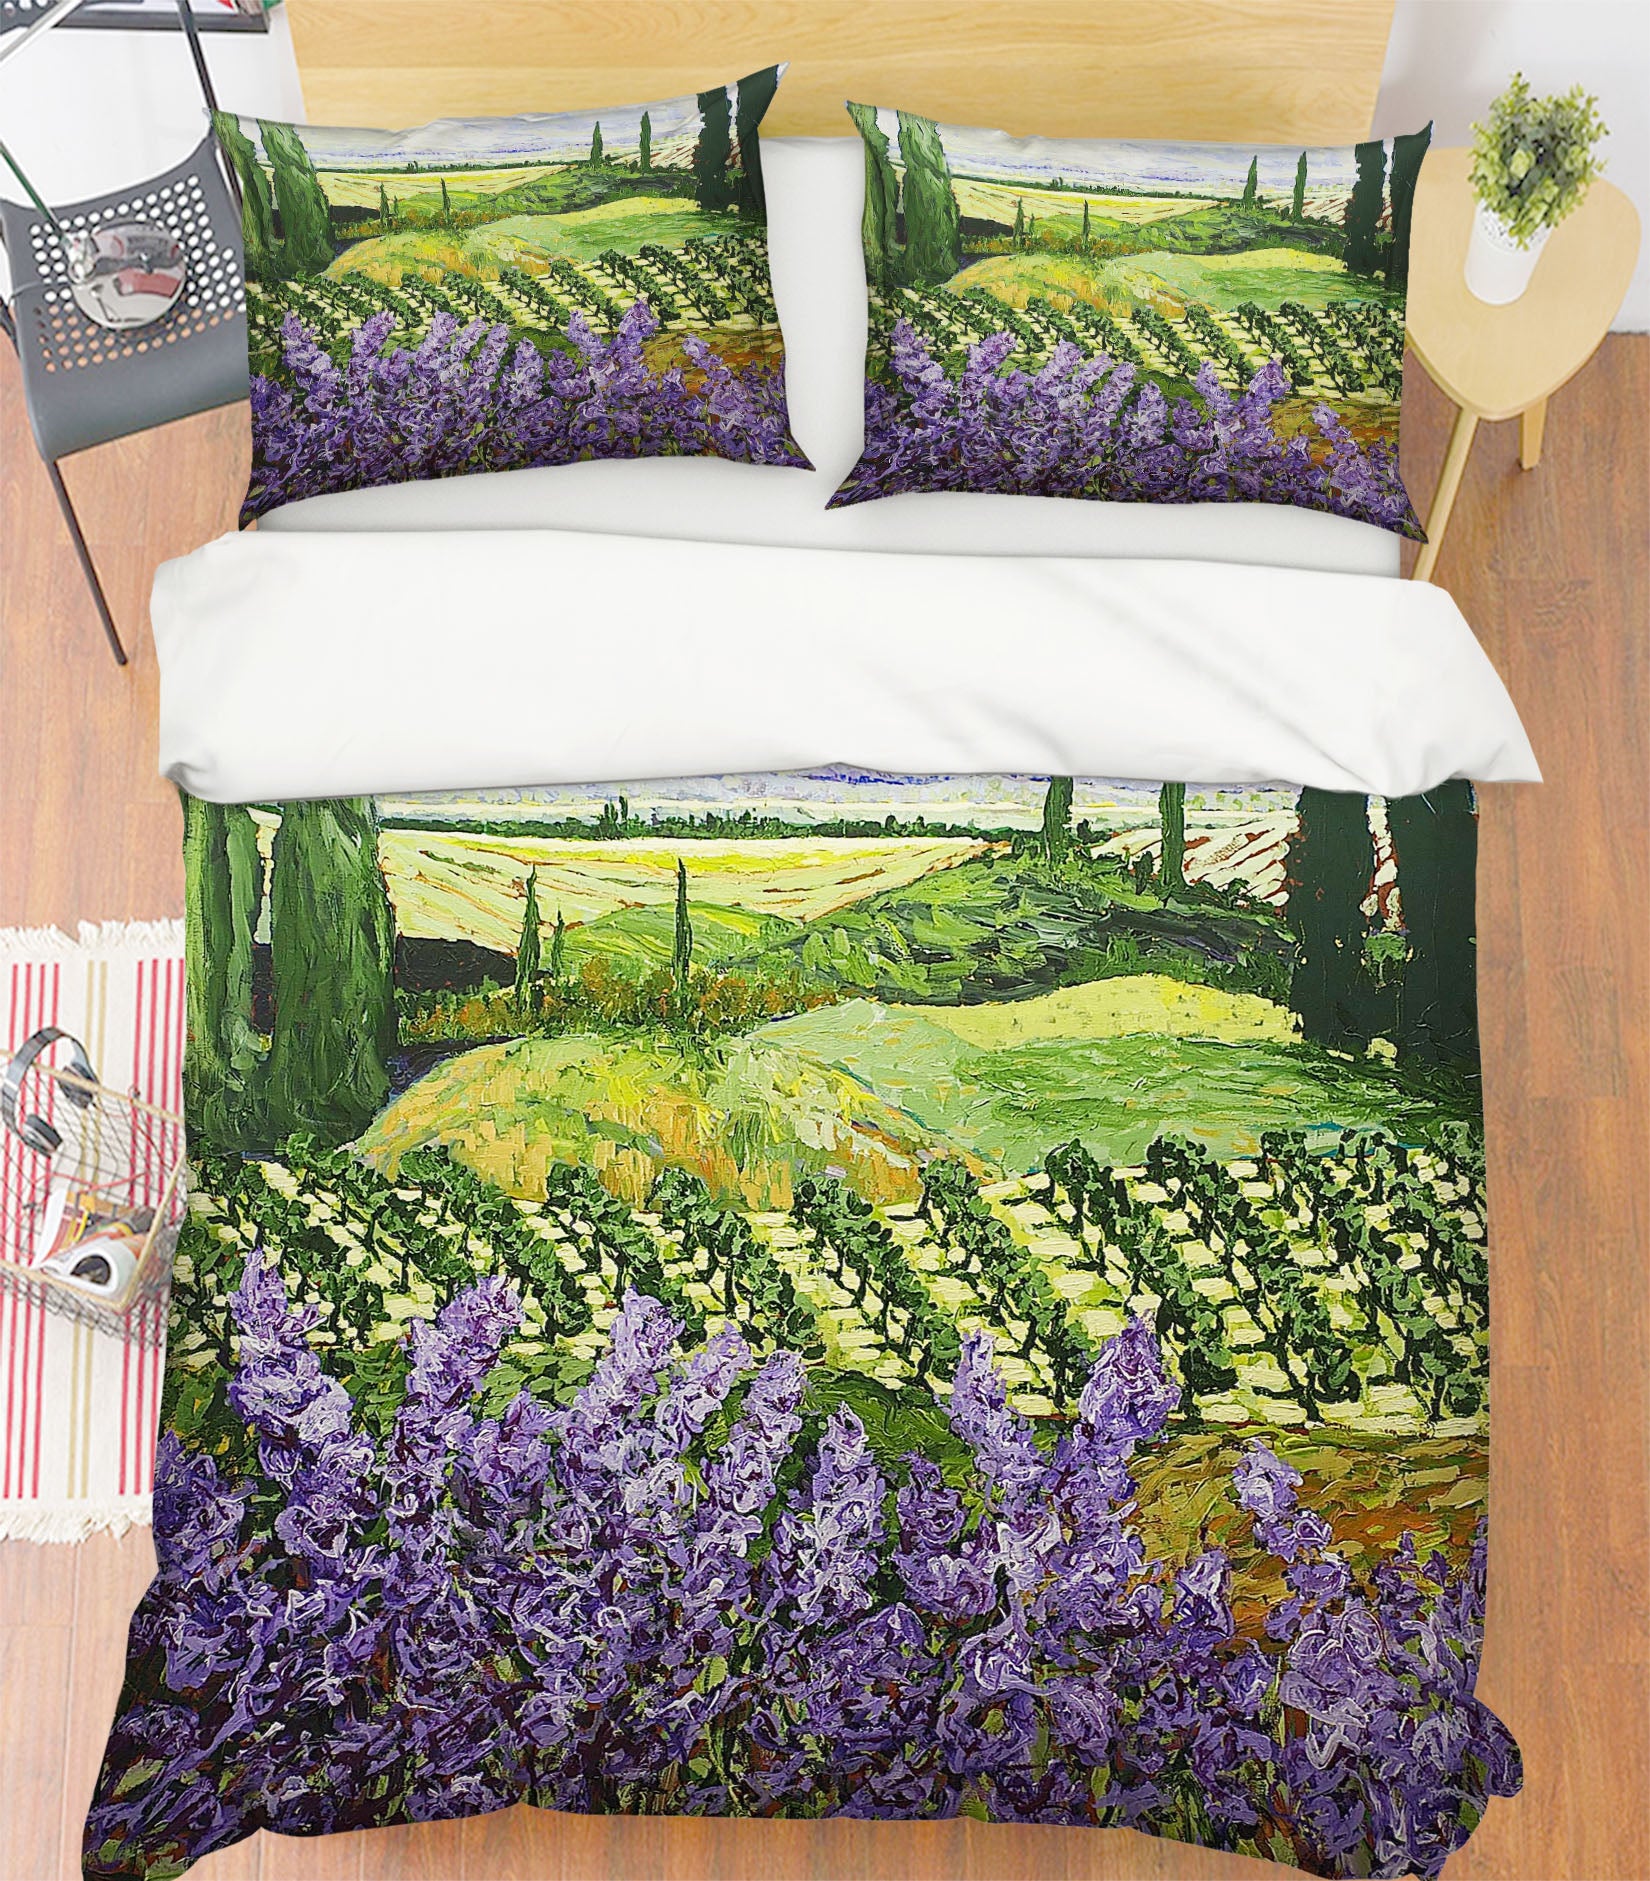 3D Chinaberry Hill 2118 Allan P. Friedlander Bedding Bed Pillowcases Quilt